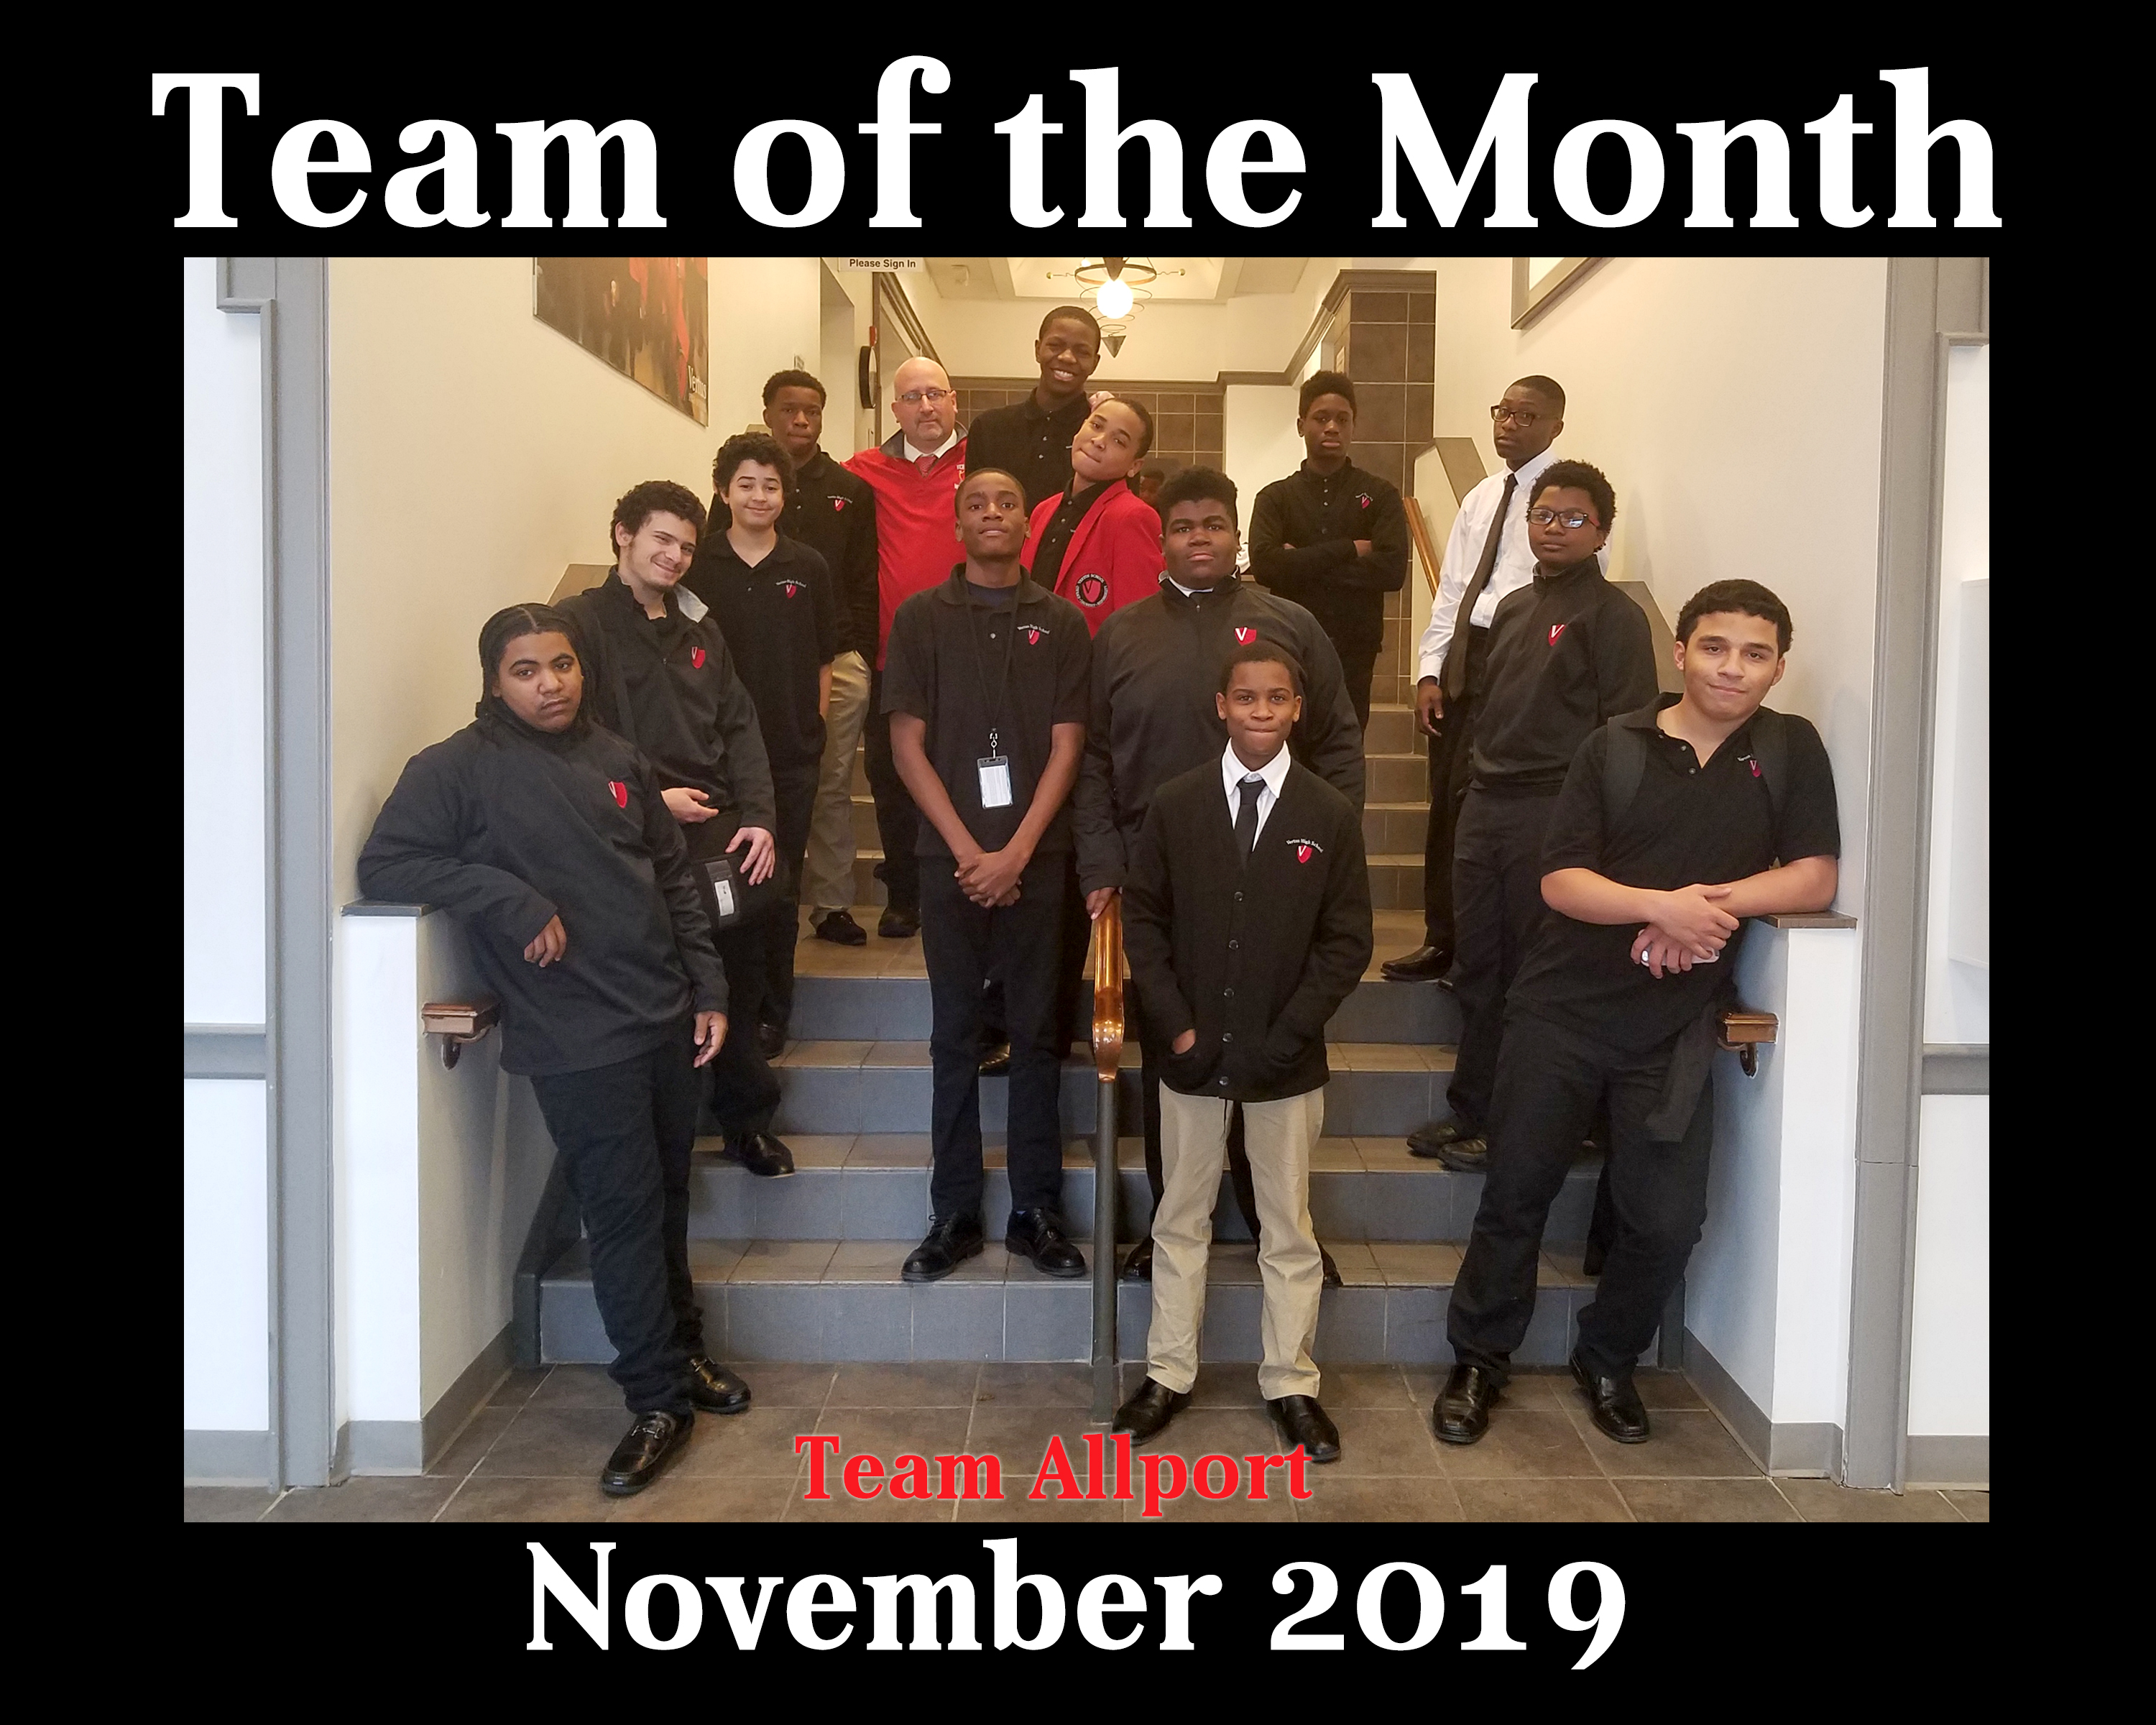 Team of the Month - November 2019